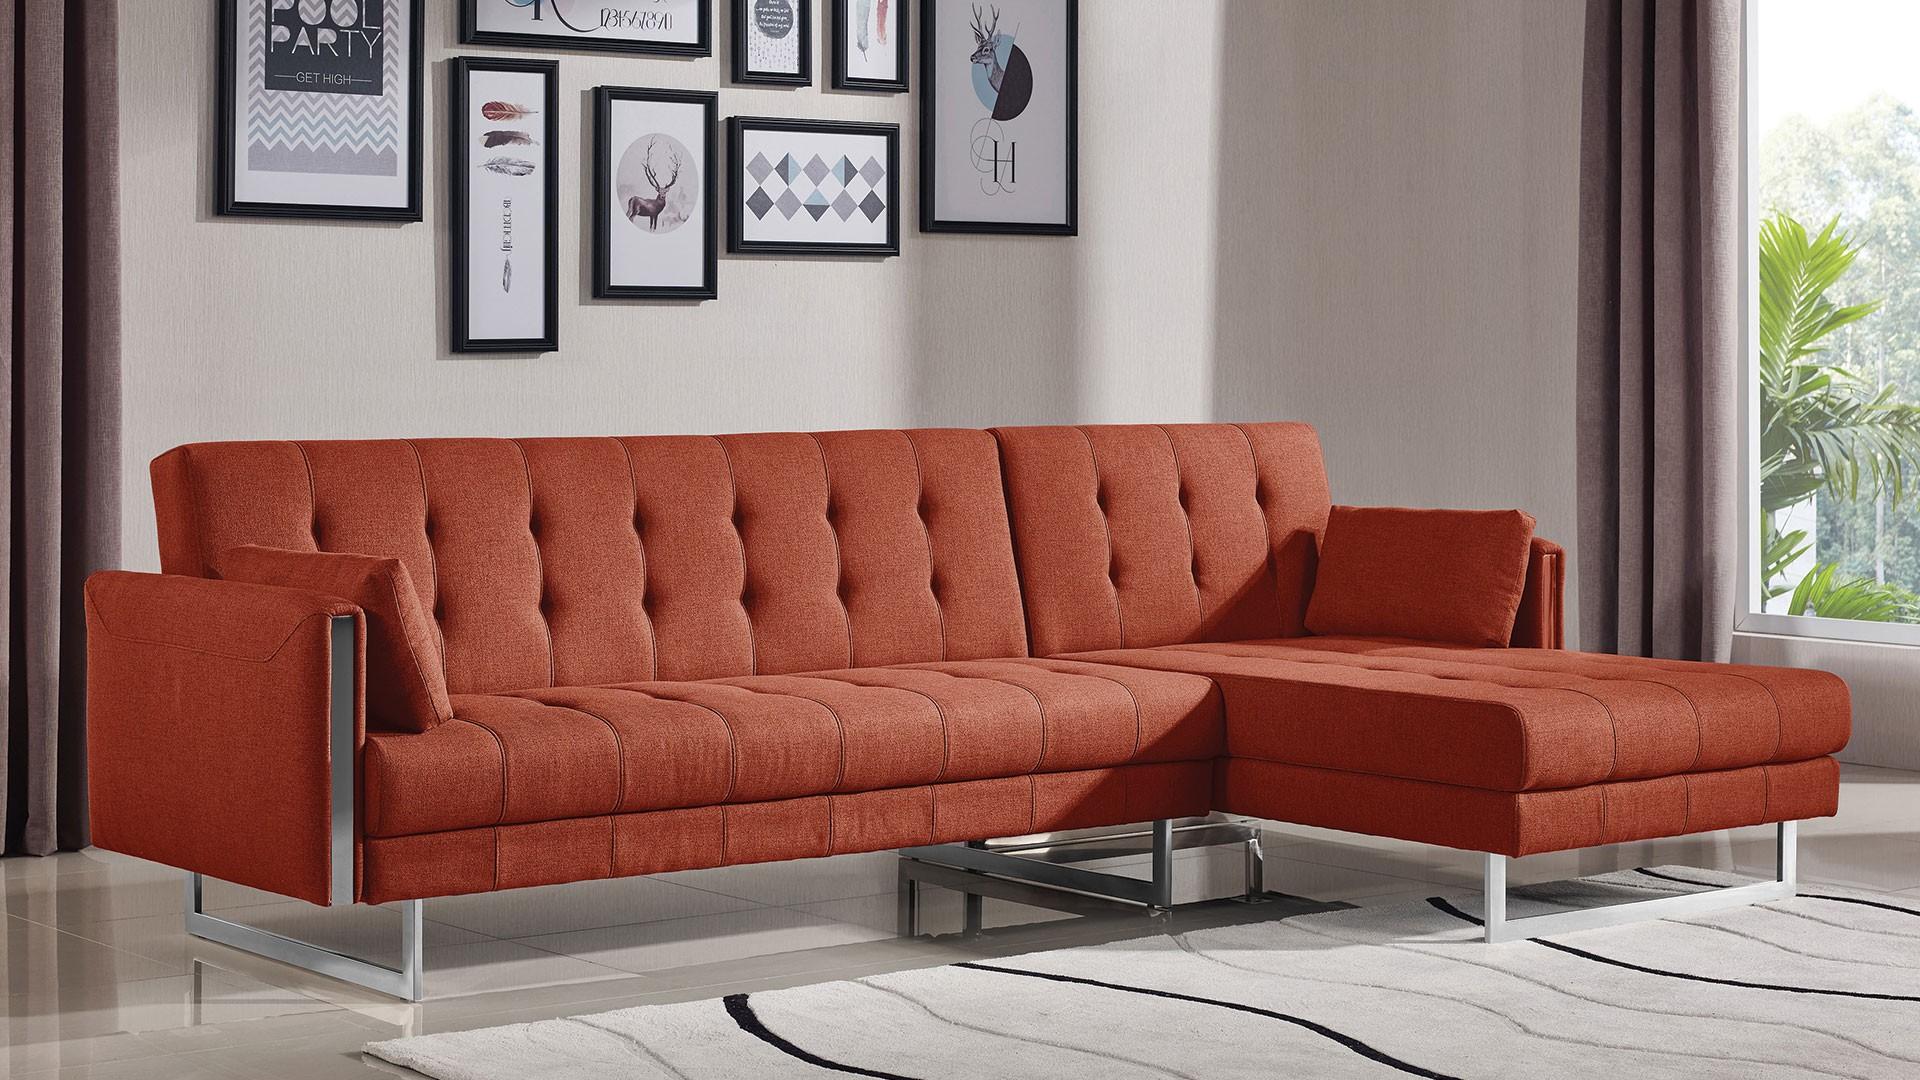 

    
At Home USA Andrea Flaming Orange Tufted Fabric Sectional Sofa Bed Contemporary
